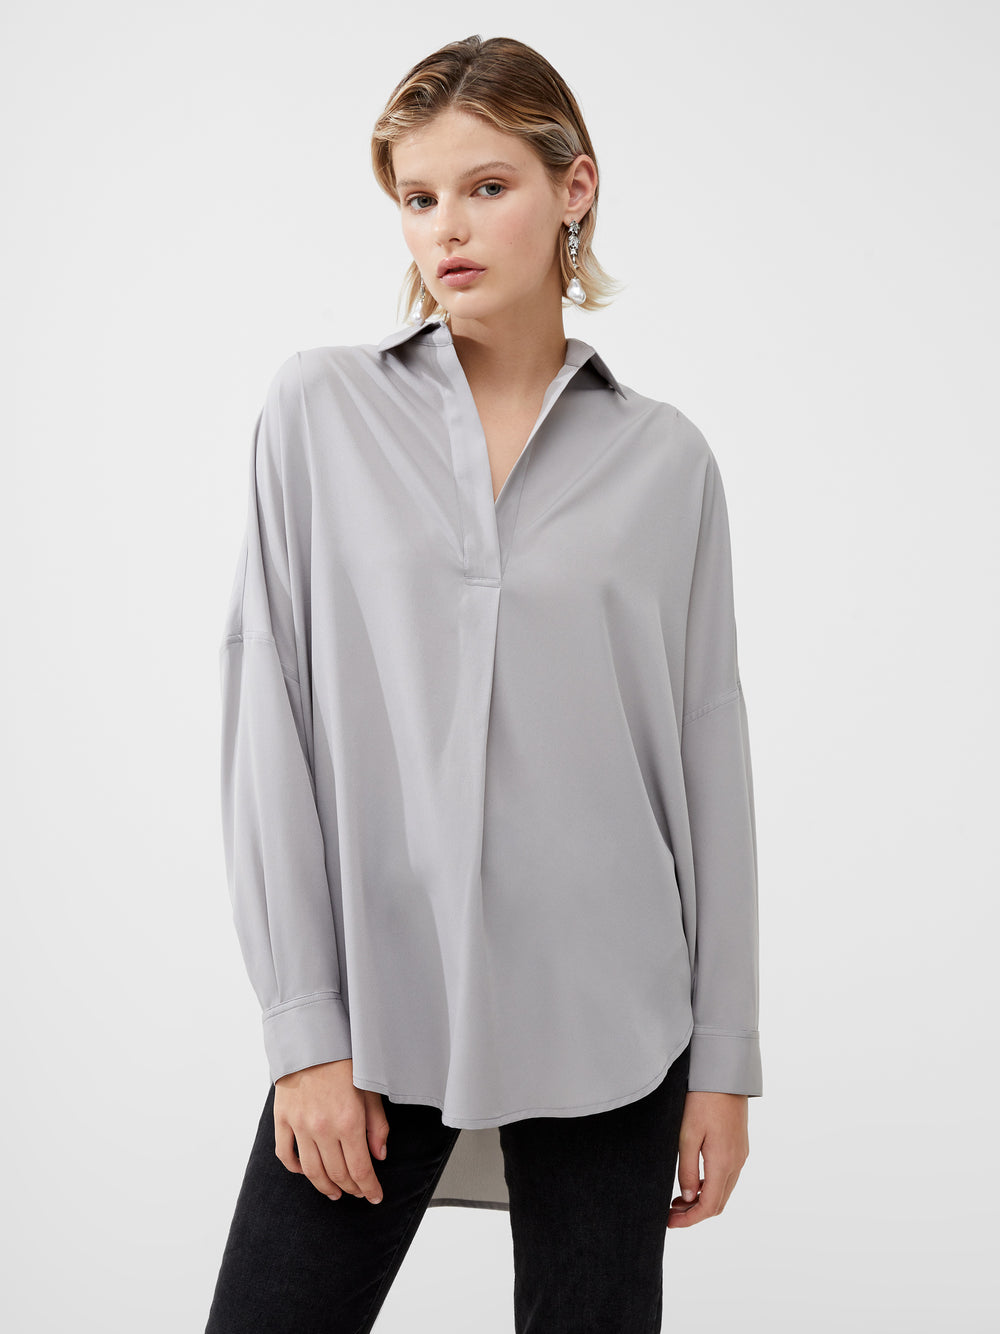 Rhodes Recycled Crepe Popover Shirt Alloy | French Connection UK